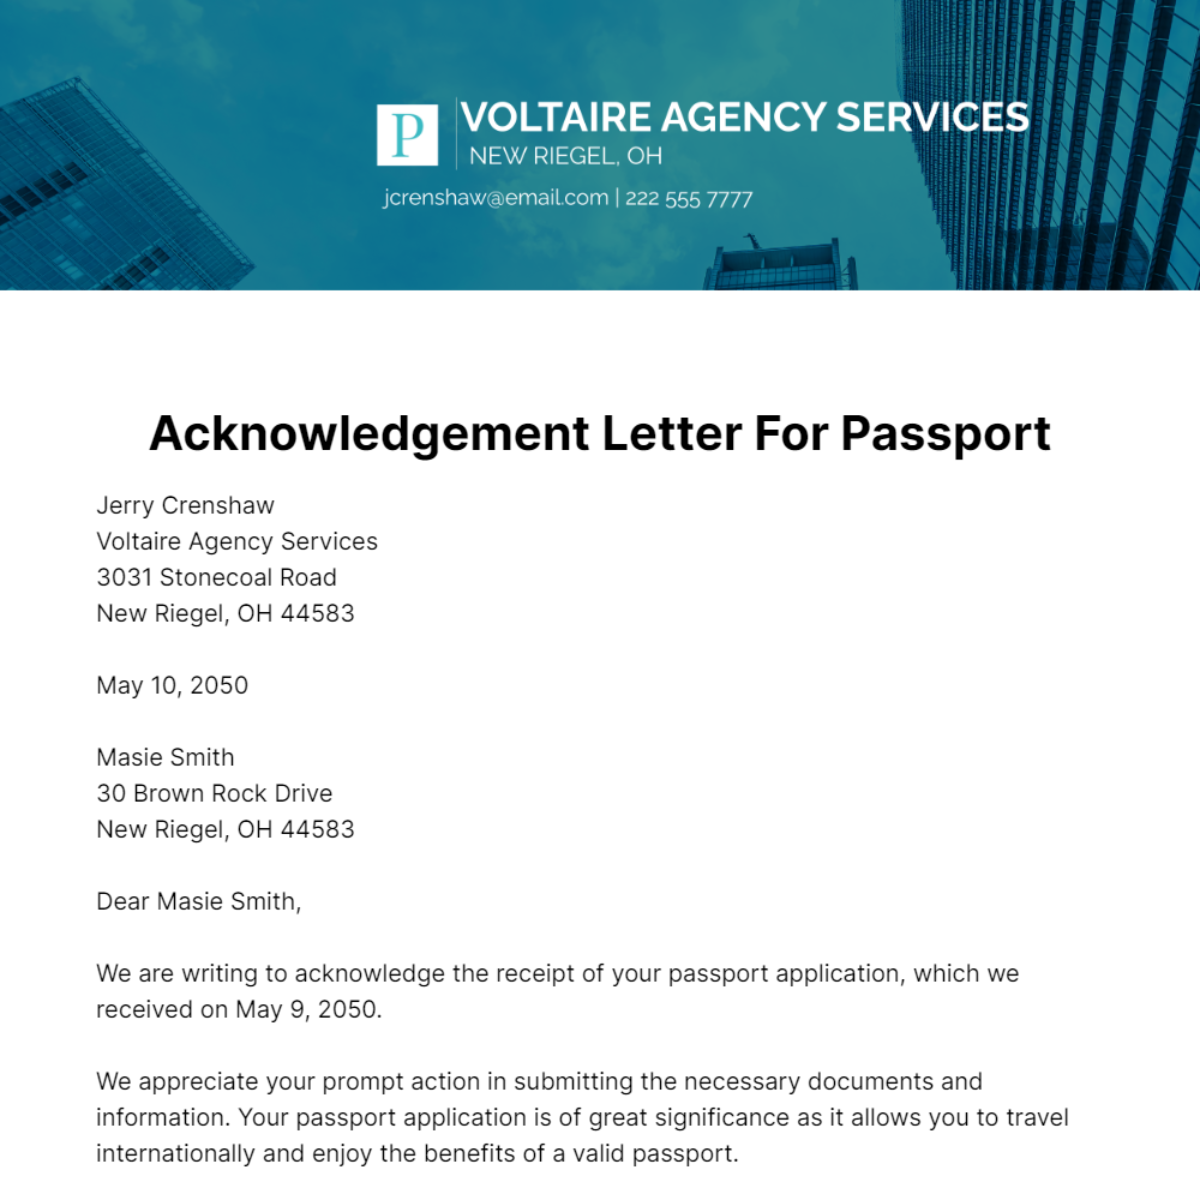 Acknowledgement Letter for Passport  Template